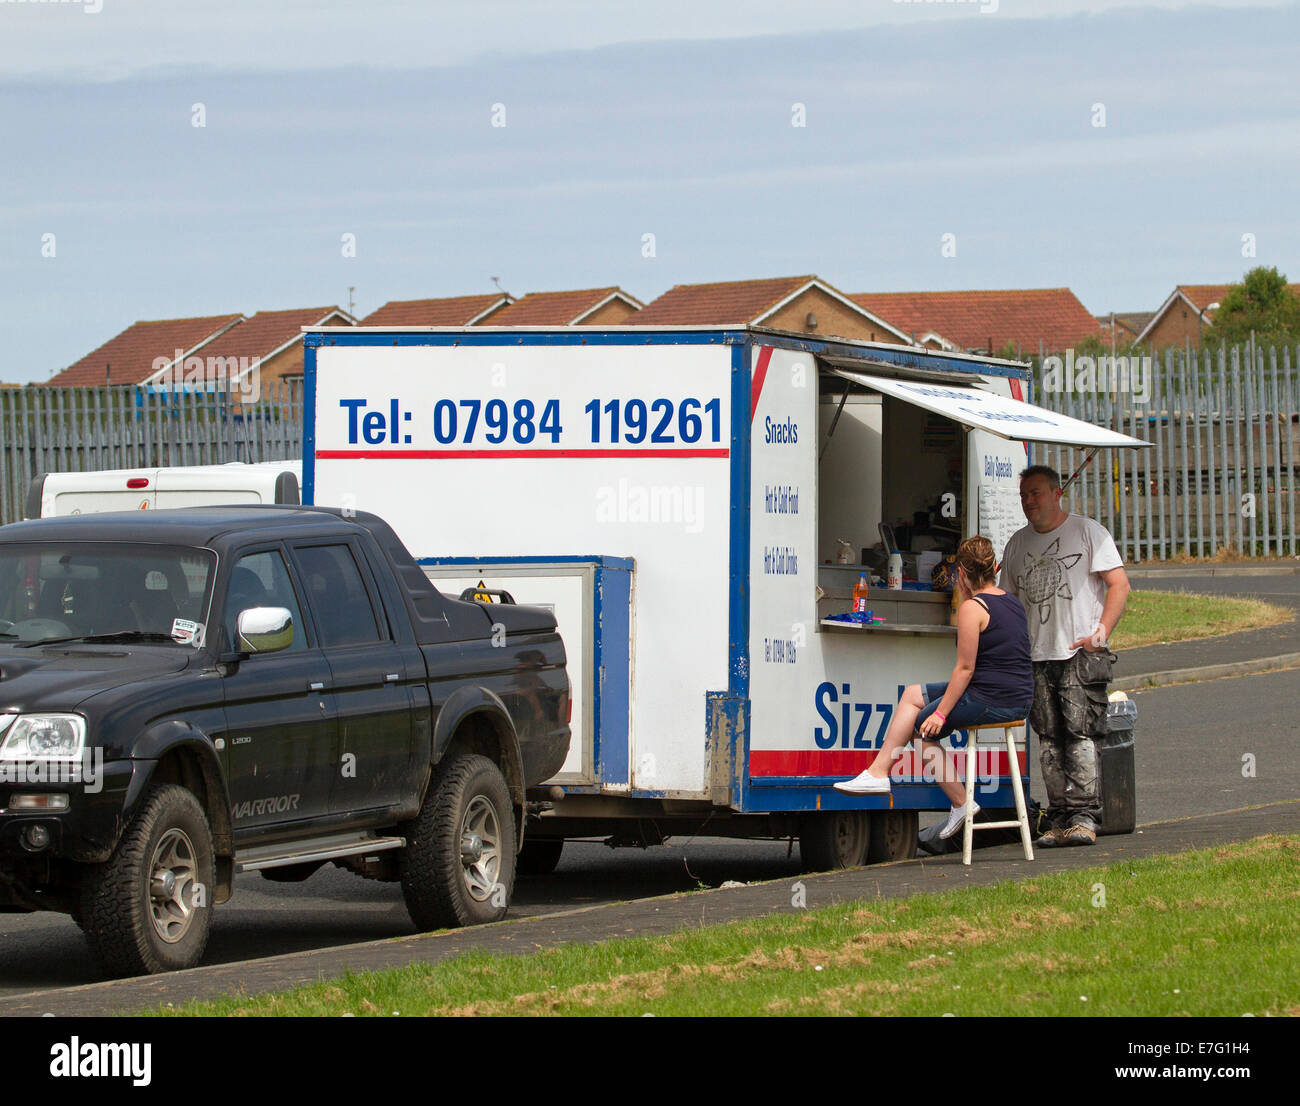 Man and woman, one seated on stool, waiting to be served at mobile roadside takeaway food van in England Stock Photo